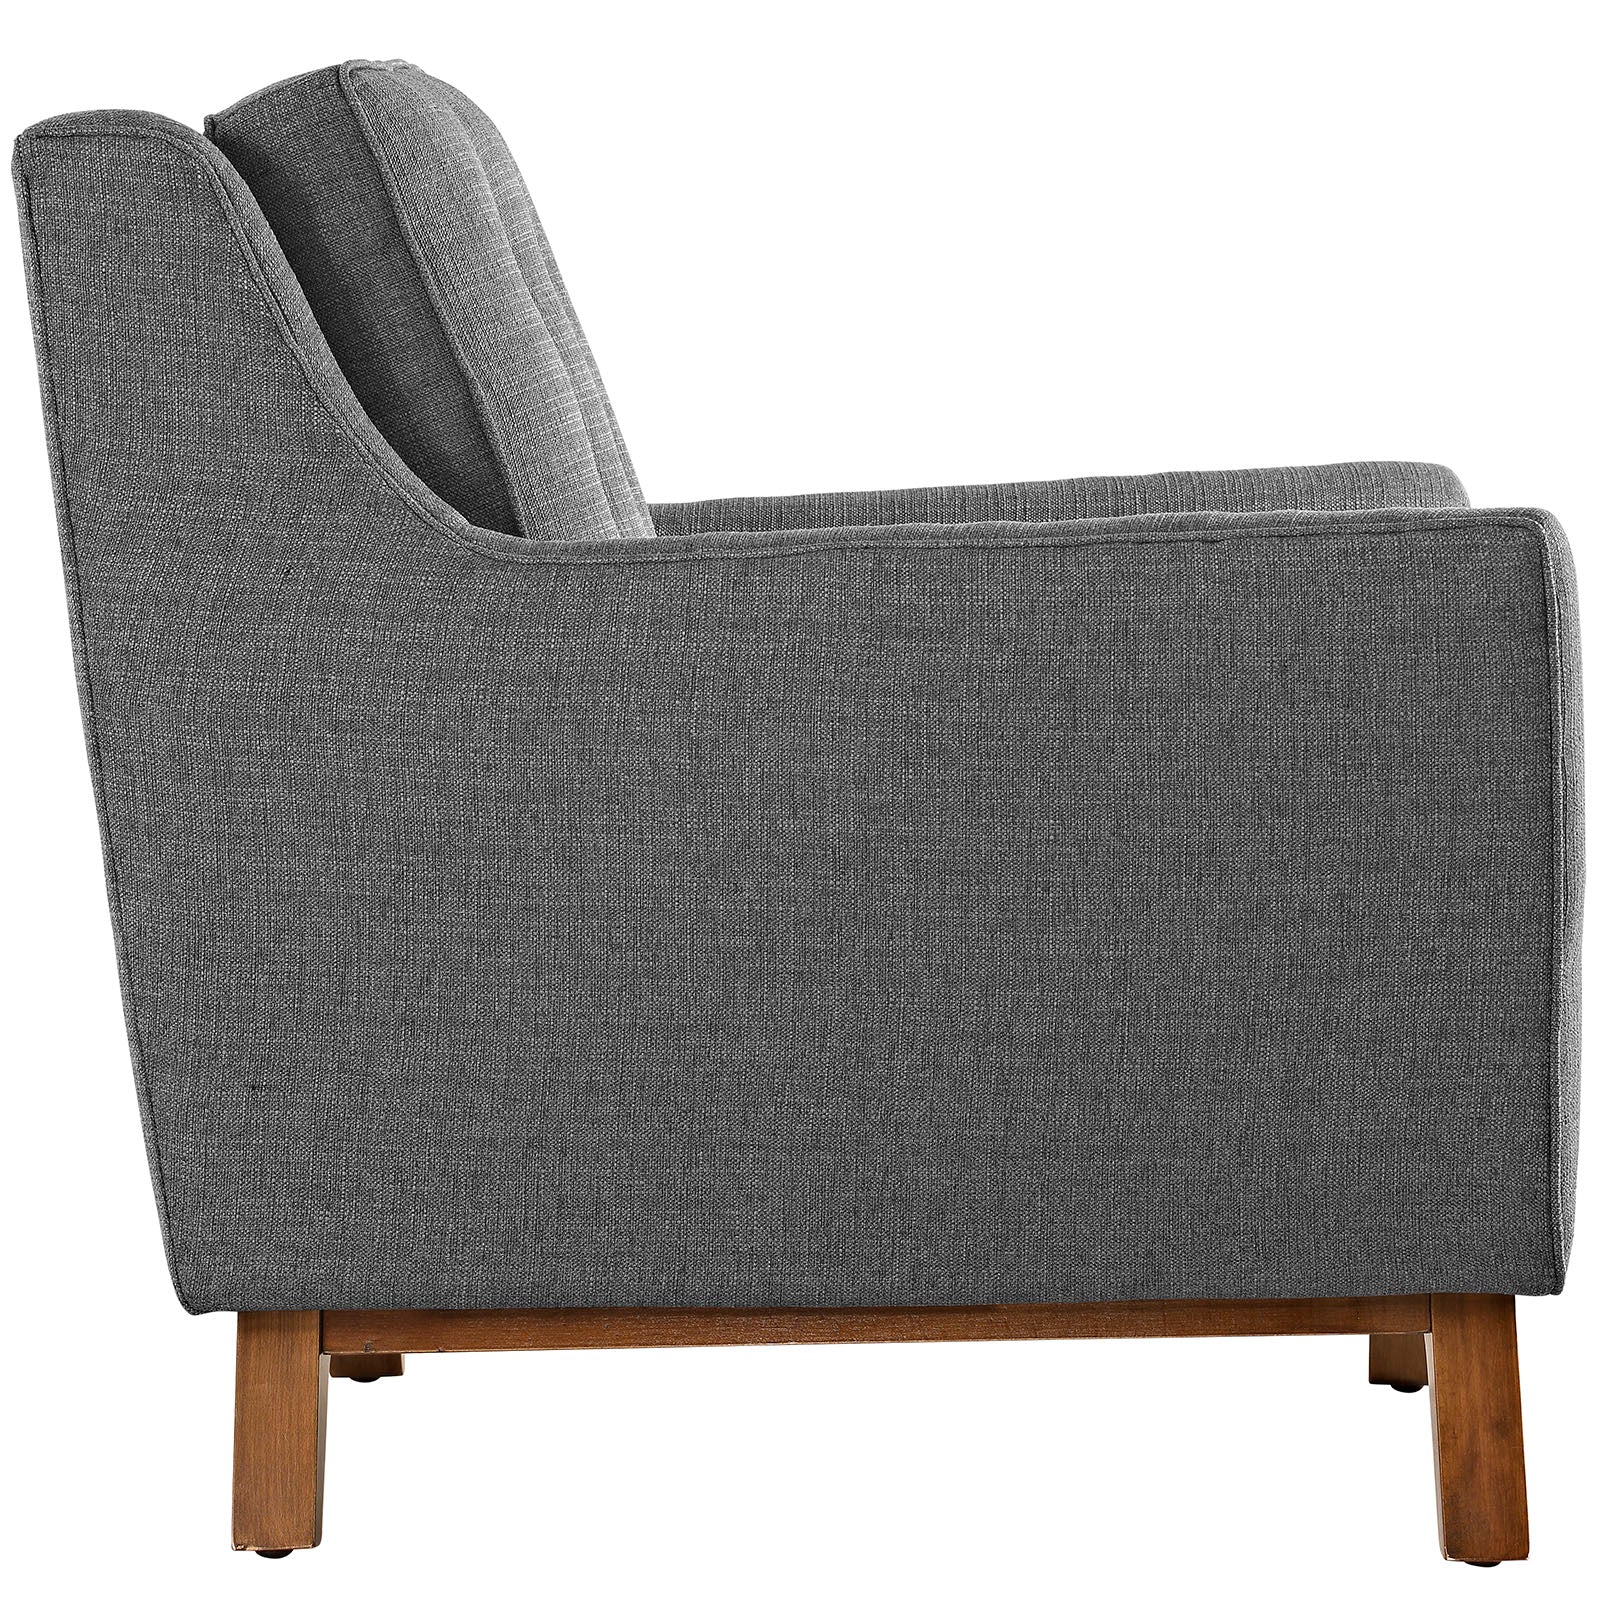 Modway Accent Chairs - Beguile Upholstered Fabric Armchair Gray